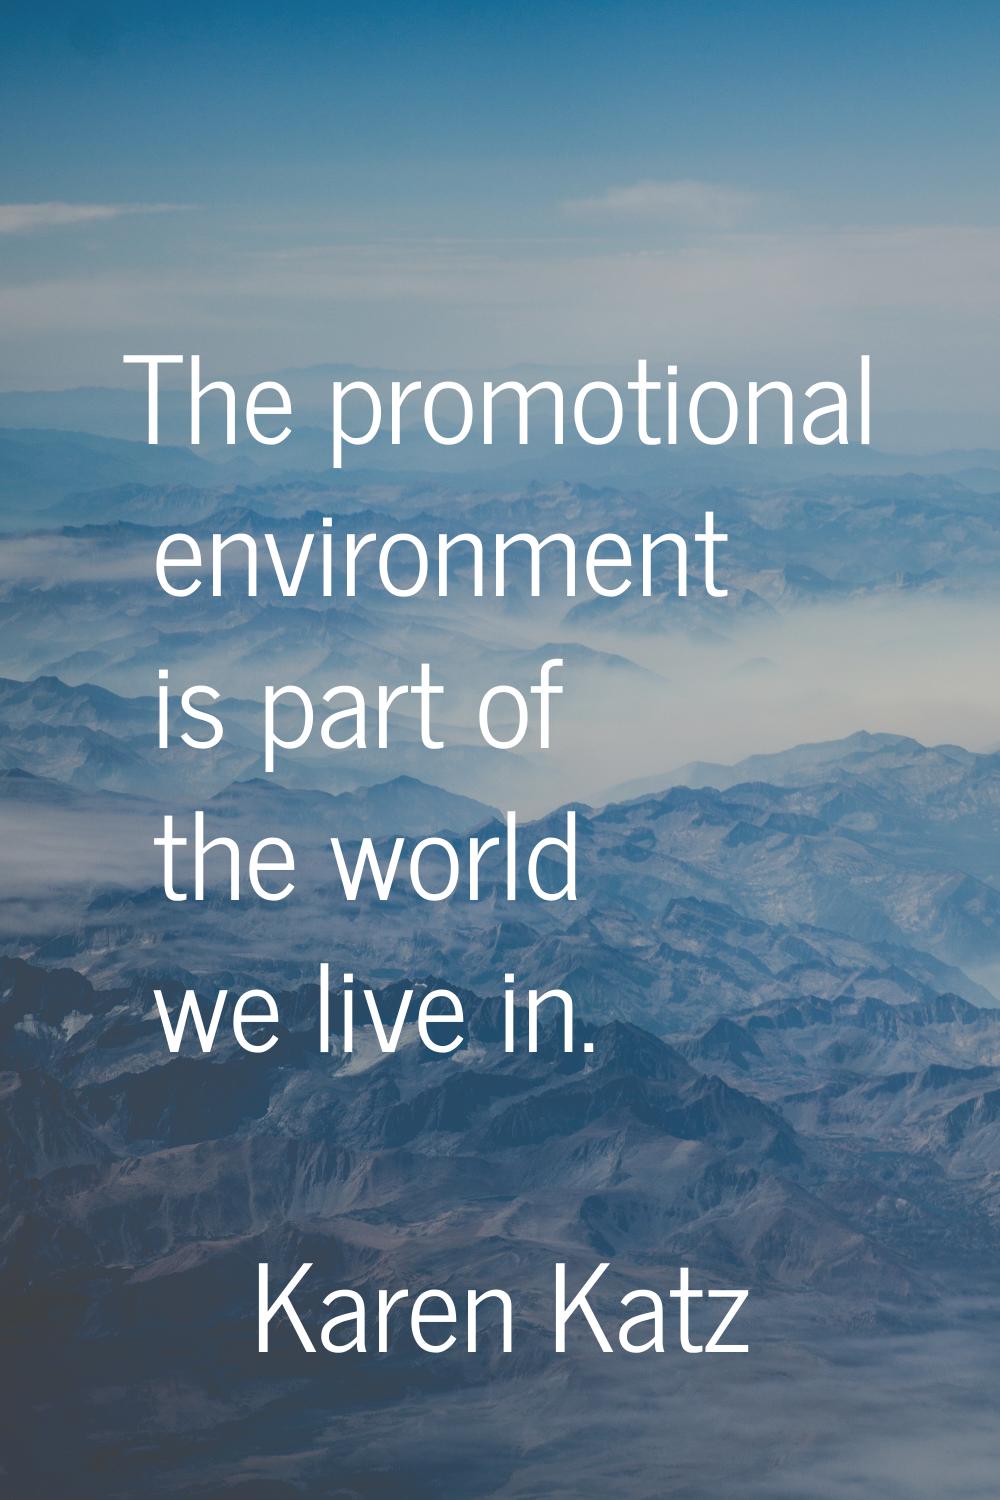 The promotional environment is part of the world we live in.